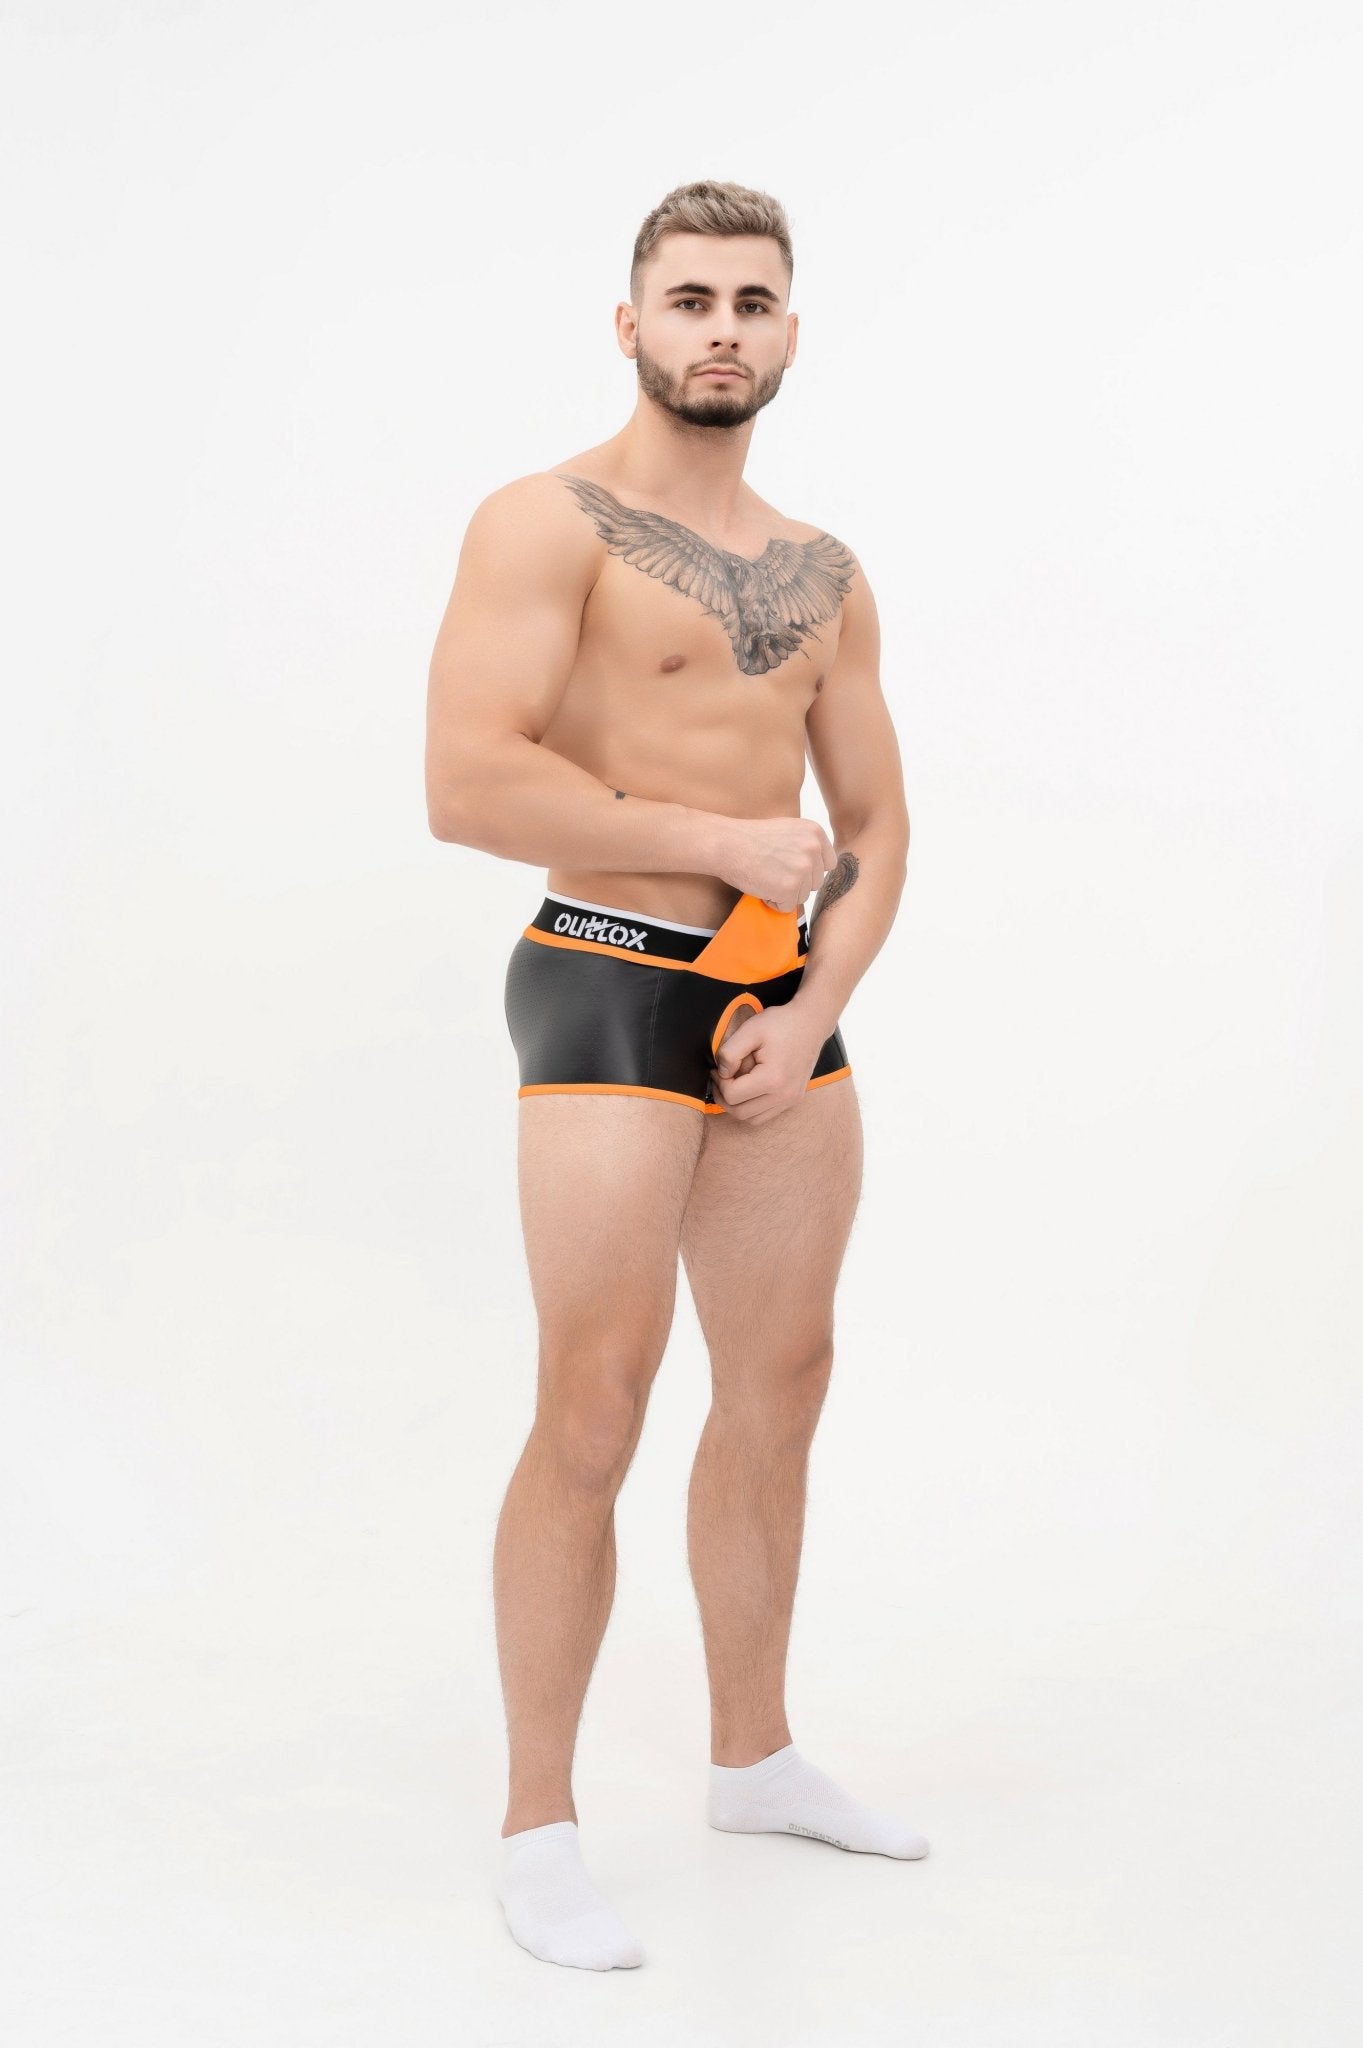 Outtox Open Rear Trunks with Snap Piece - Jockstraps.com